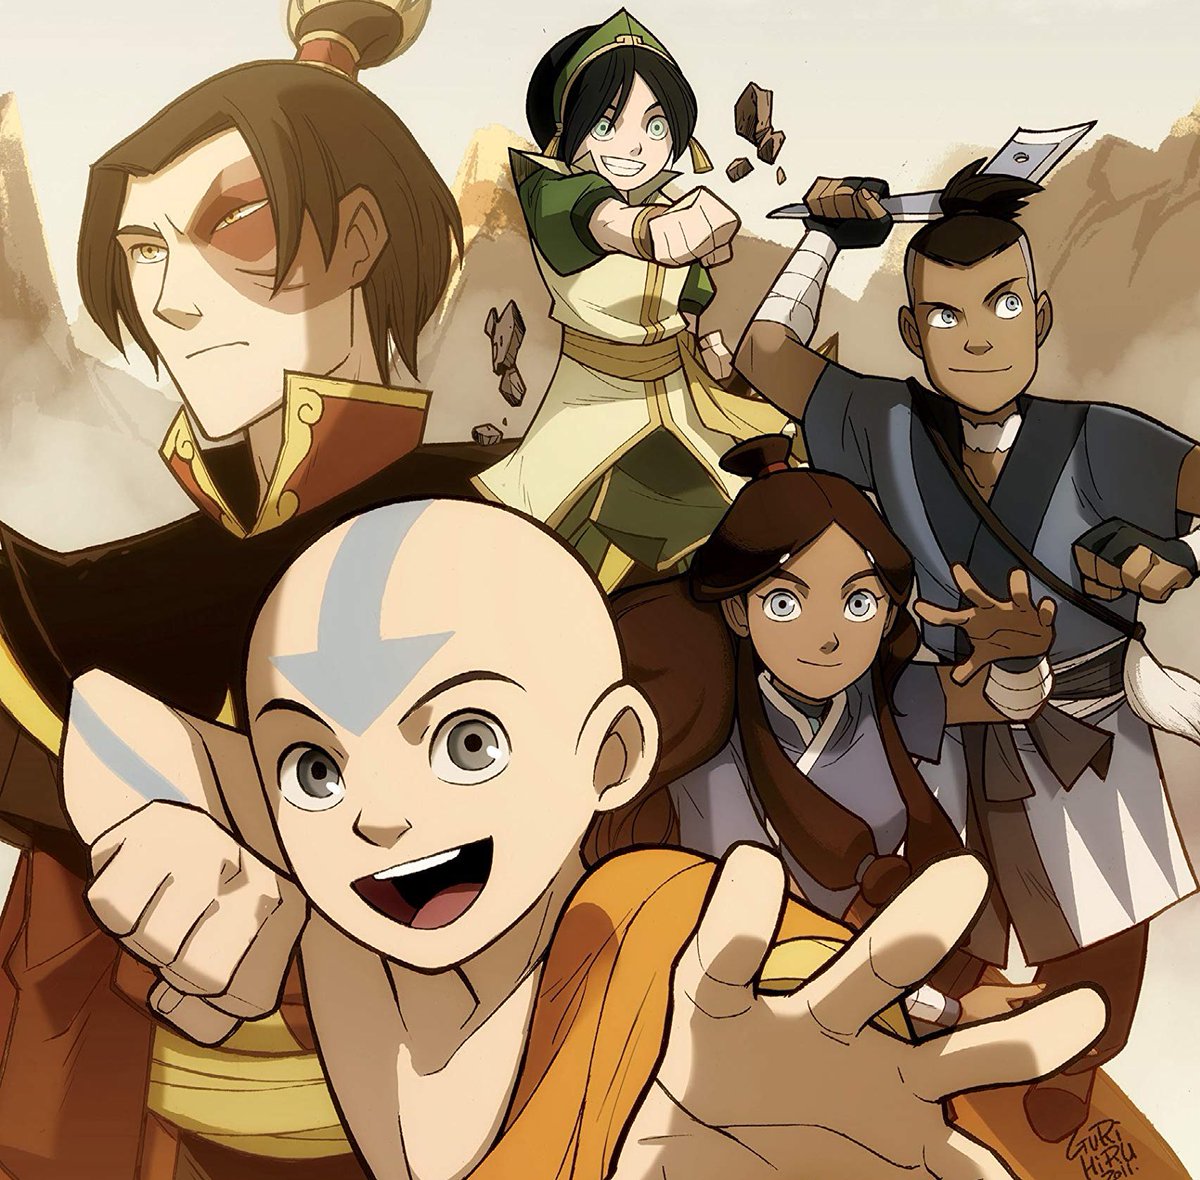 Thread by @mattdaeo, EXO as Avatar The Last Airbender characters 1. Jongdae...